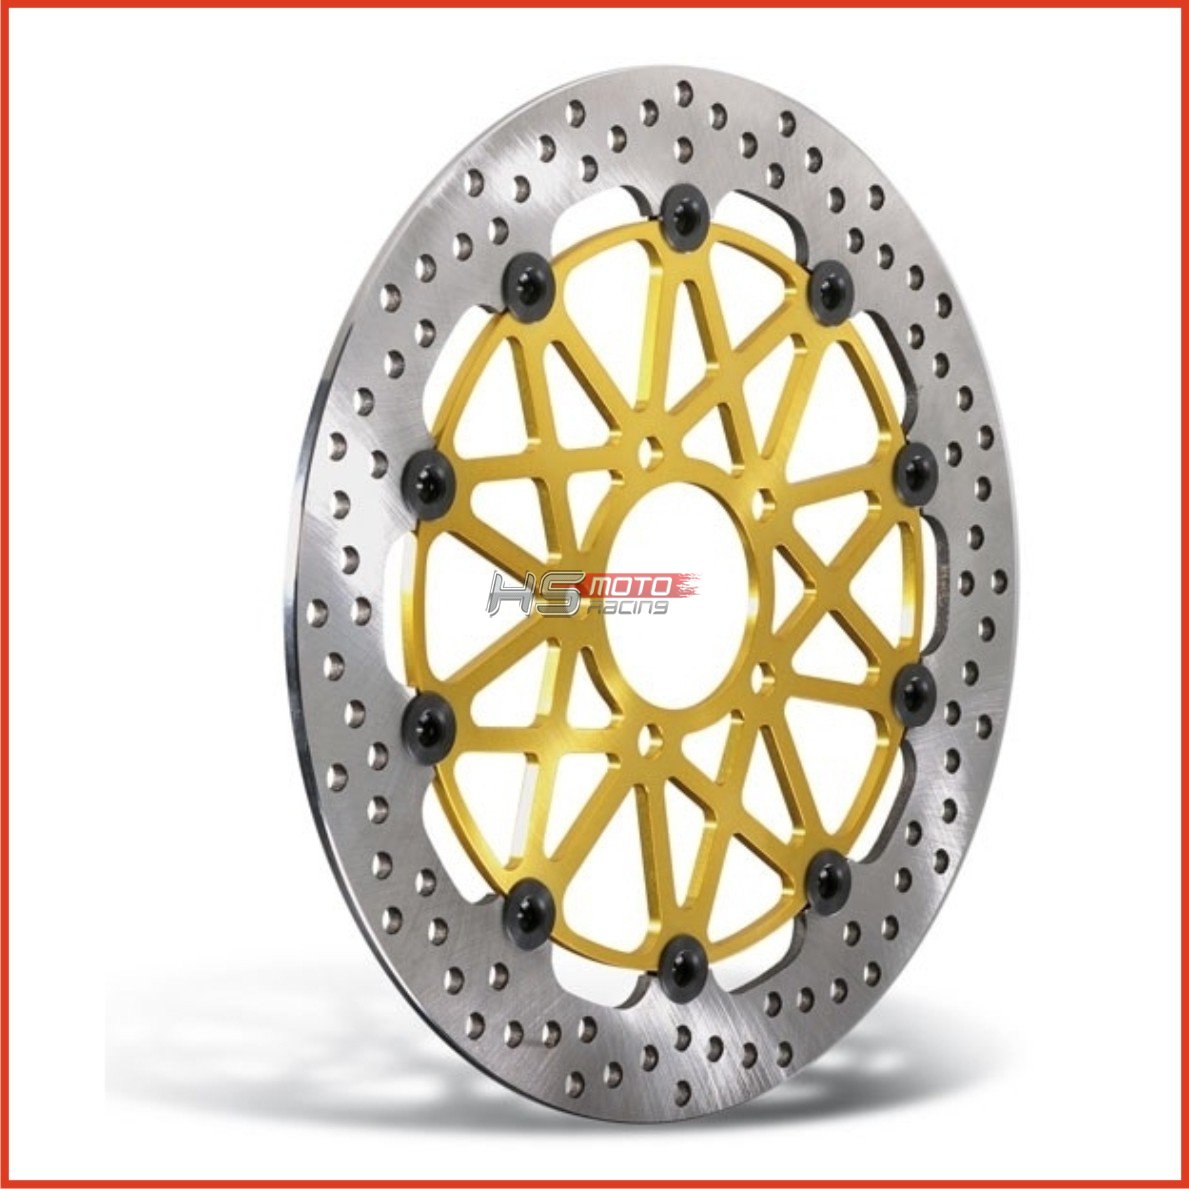 http://www.hsmotoracing.com/images/watermarked_images/detailed/4/2267_2265_2261_2251_2250_2249_2248_2237_2236_2233_BREMBO_SUPERSPORT_DISC.jpg